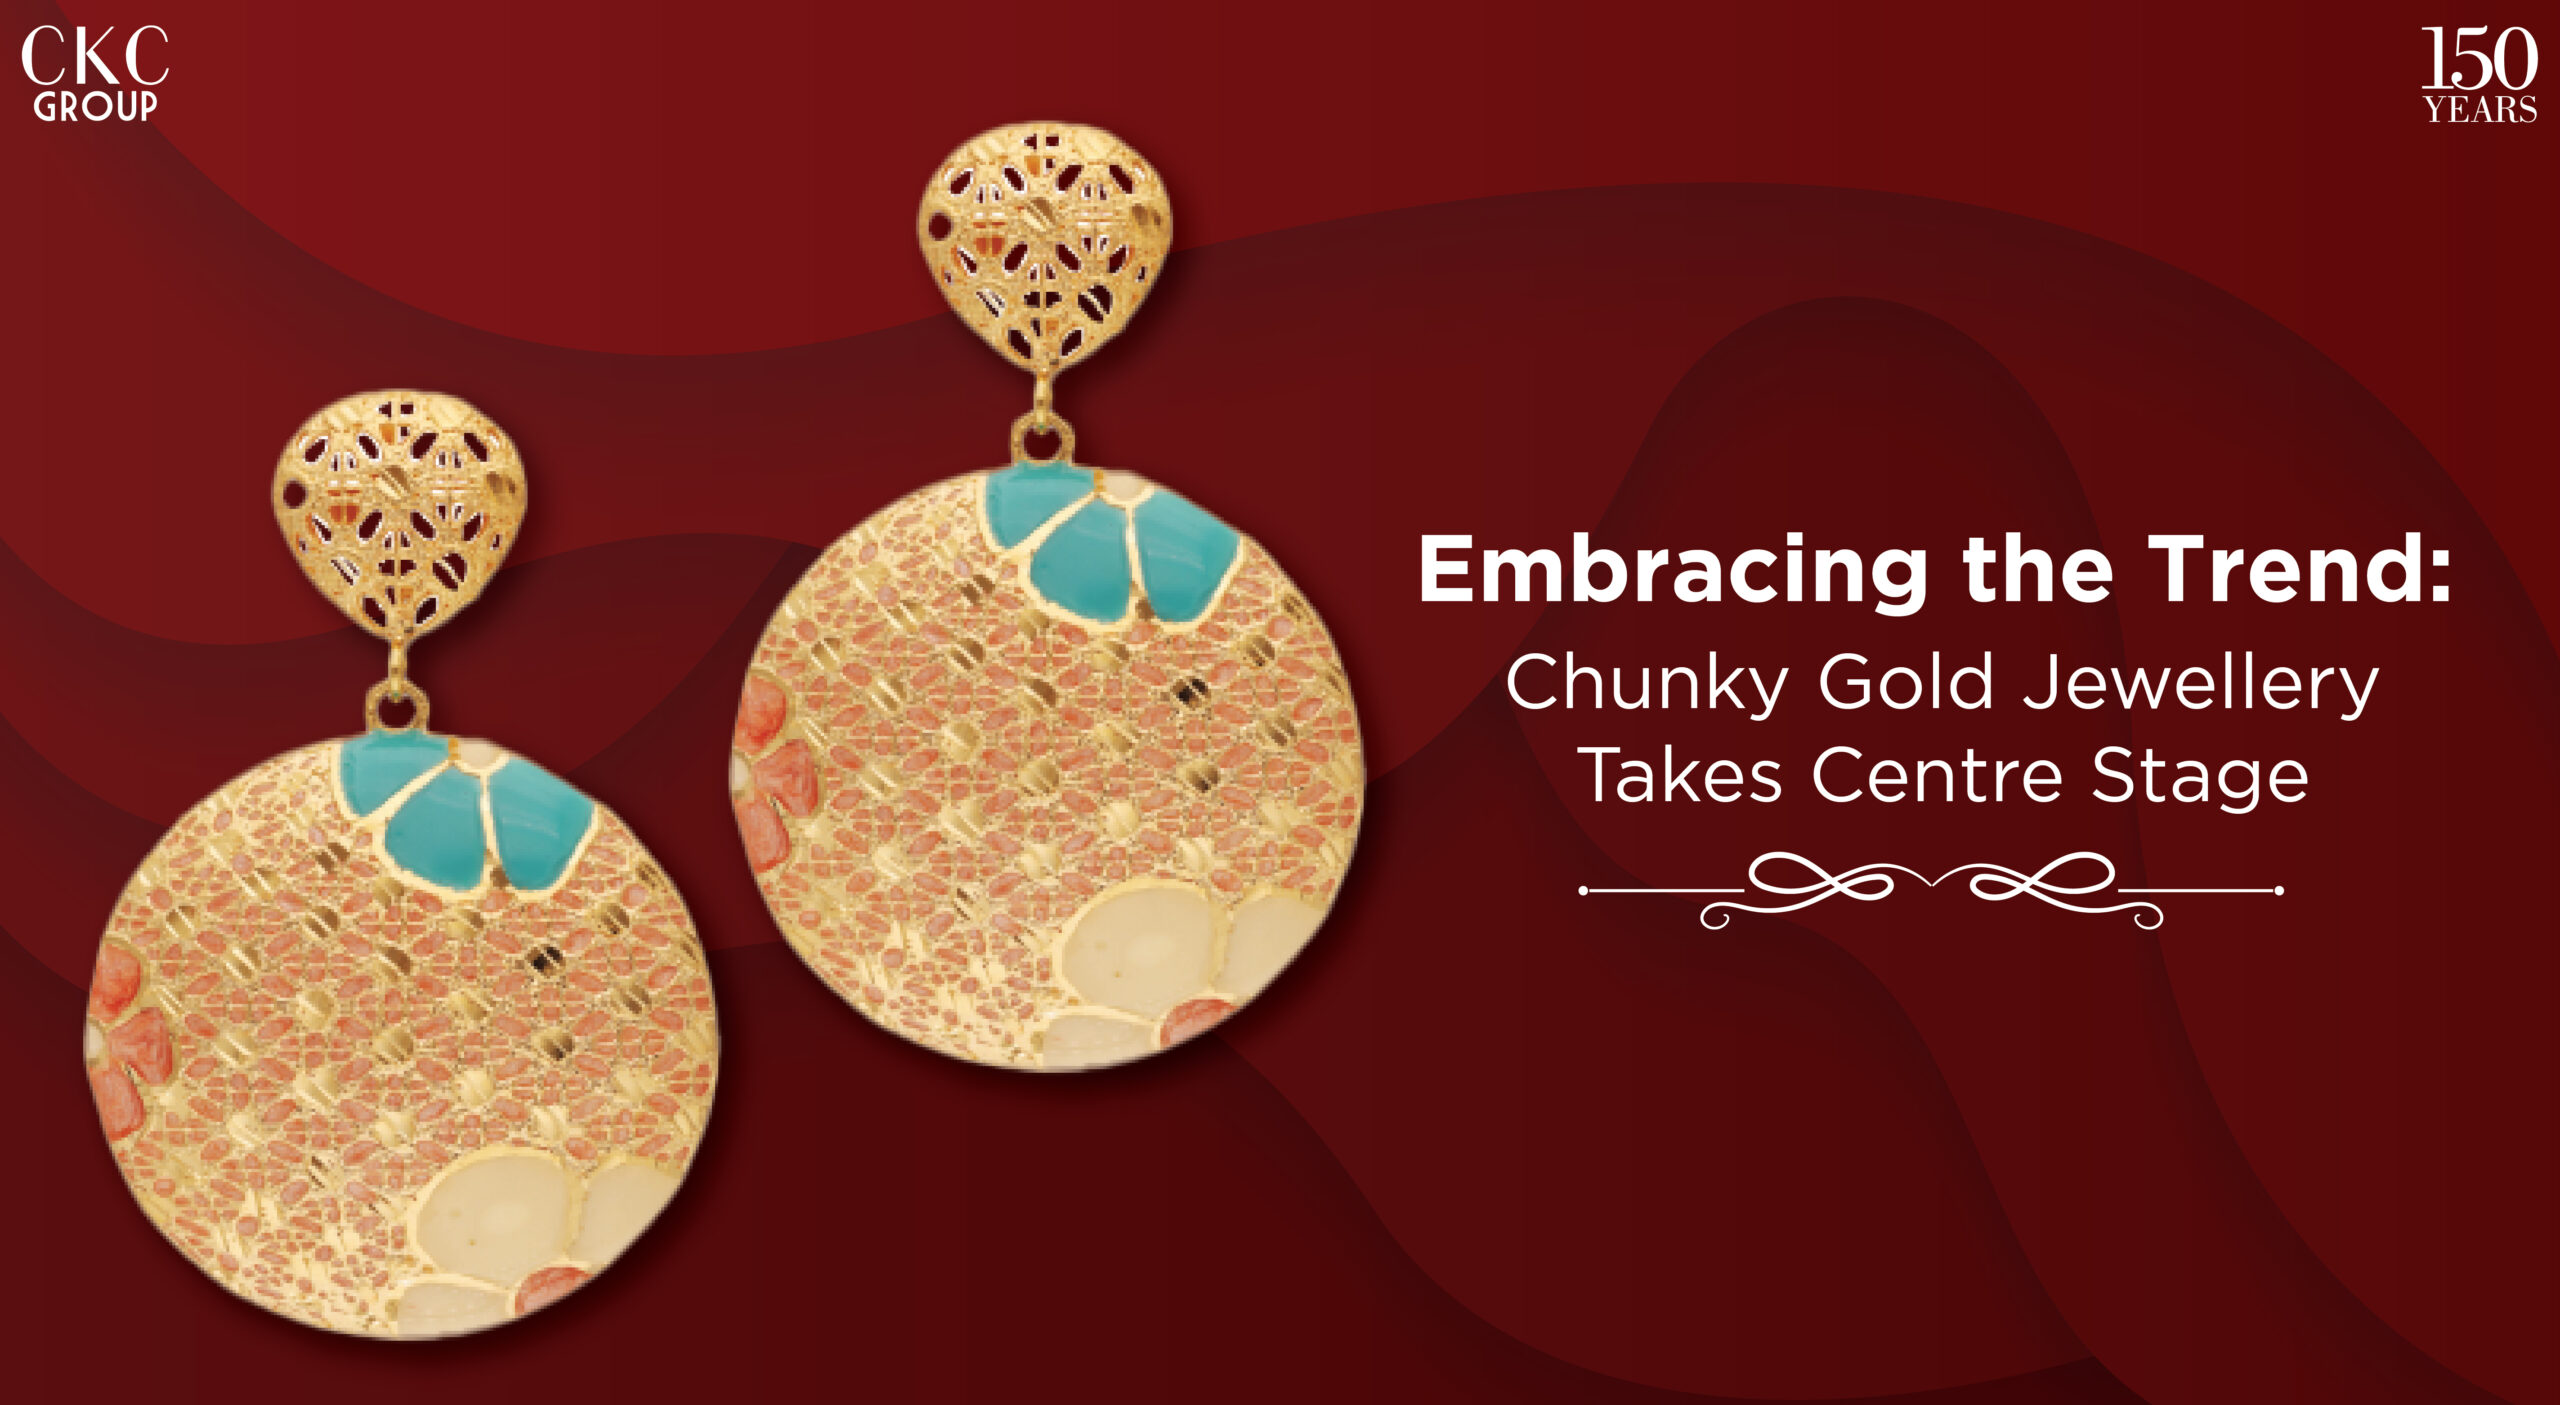 Embracing the Trend in Gold Jewellery